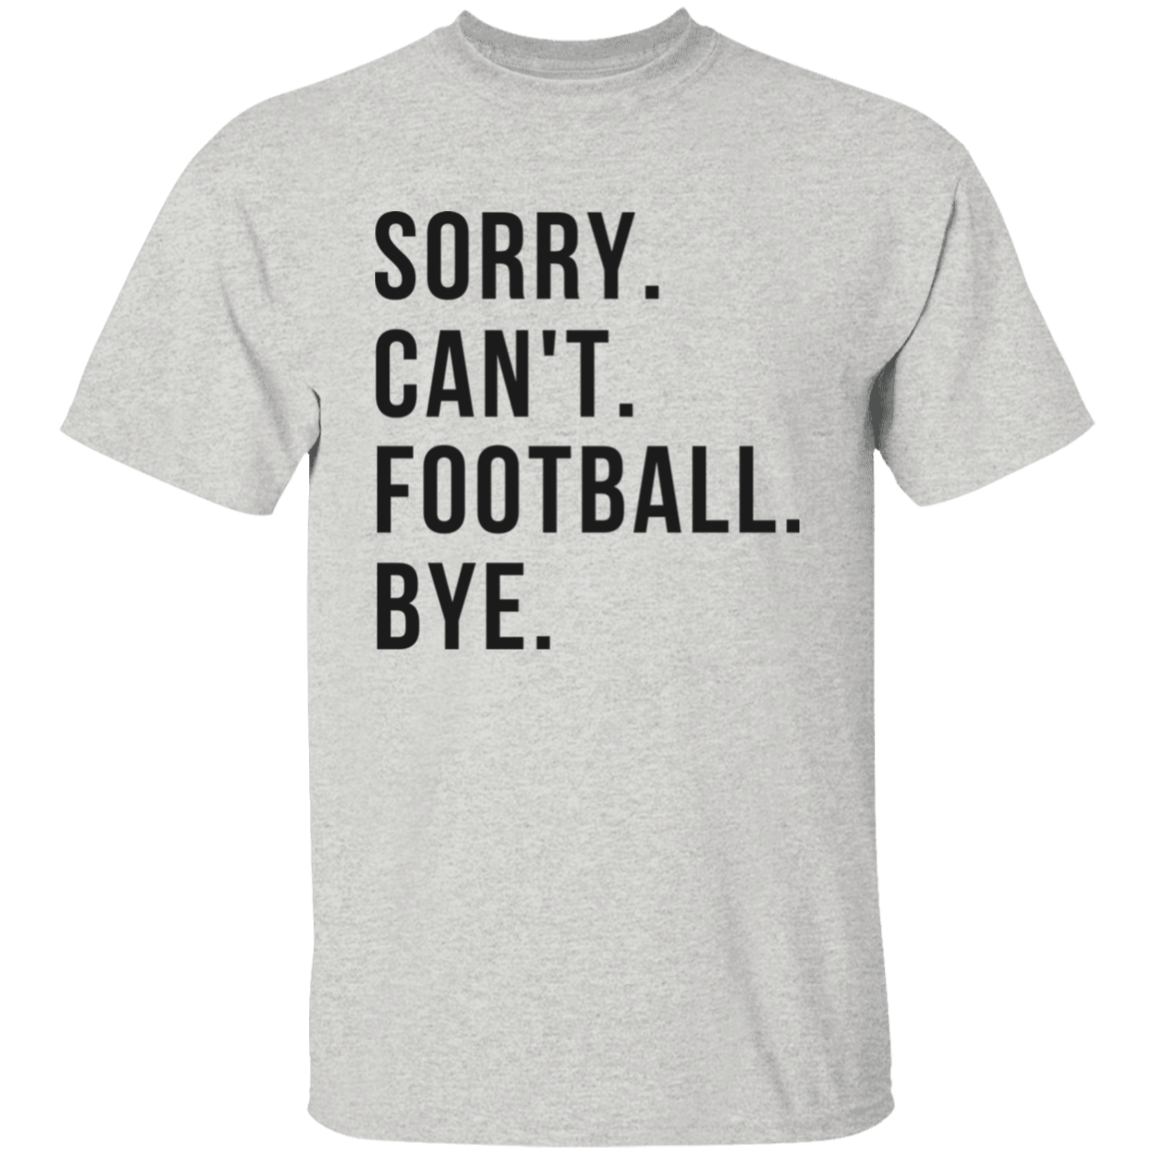 Sorry. Can't. Football. Bye. Shirt